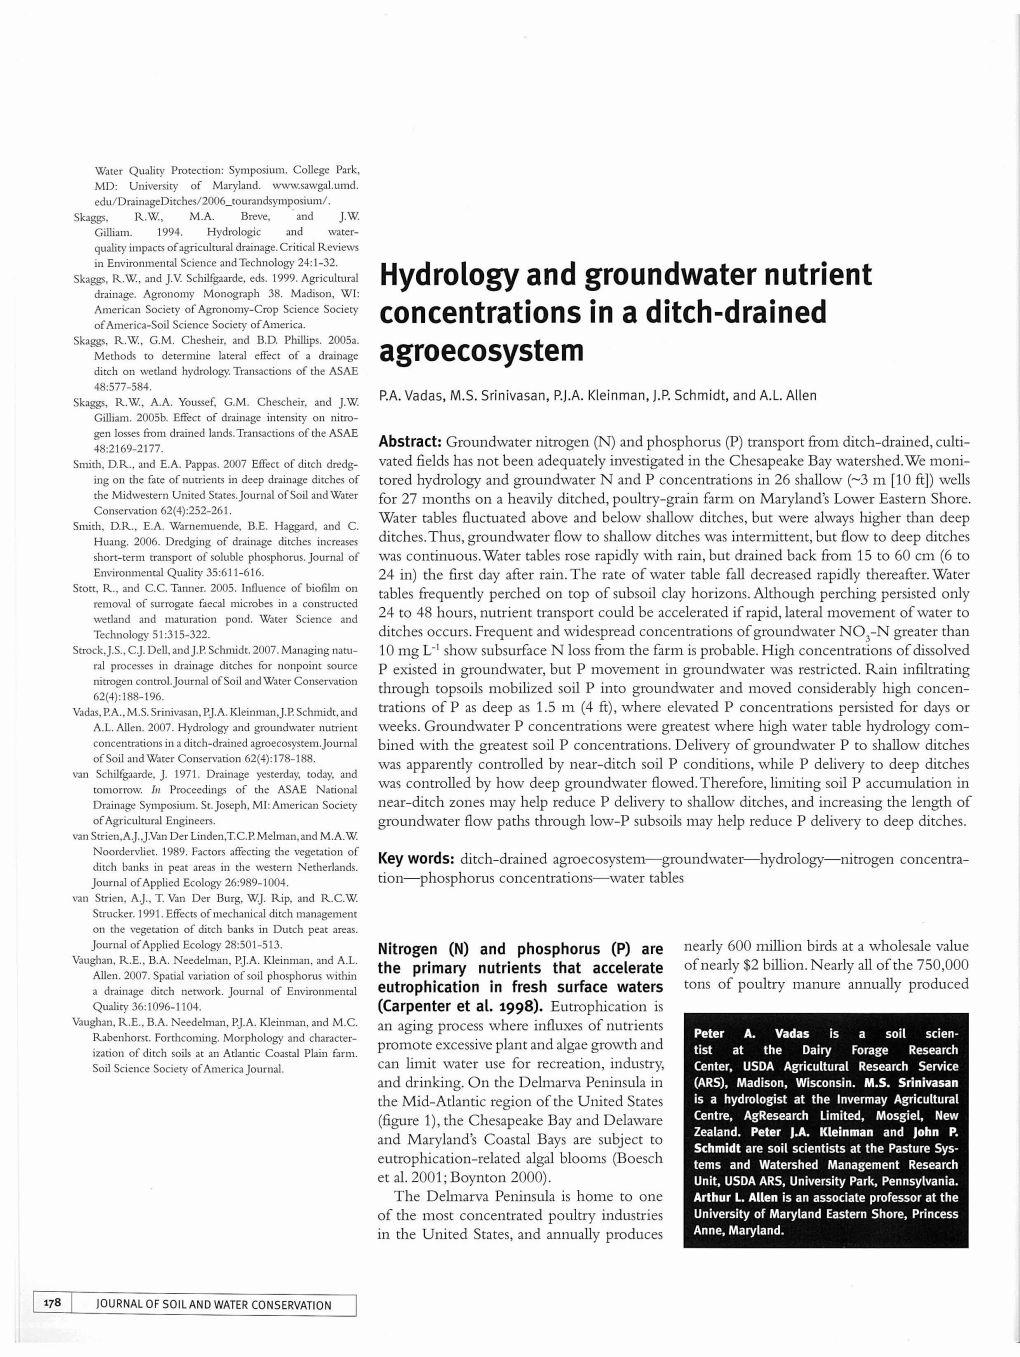 Hydrology and Groundwater Nutrient Concentrations in a Ditch-Drained